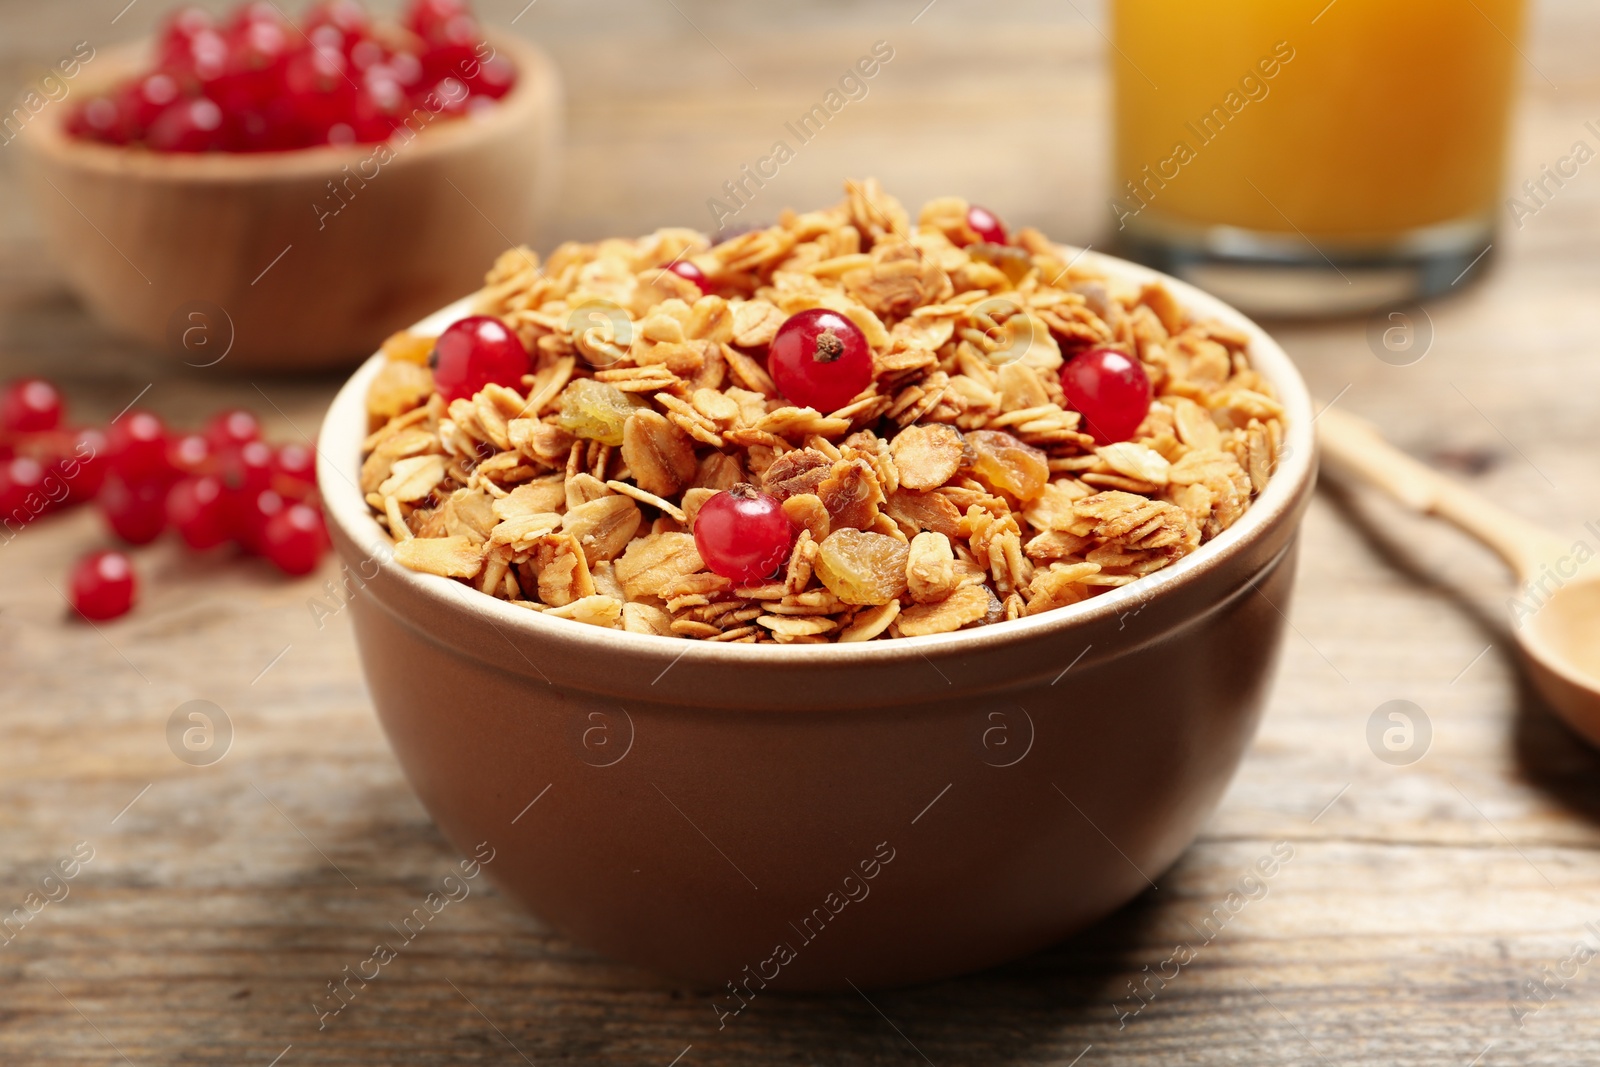 Photo of Muesli with berries served on wooden table. Delicious breakfast